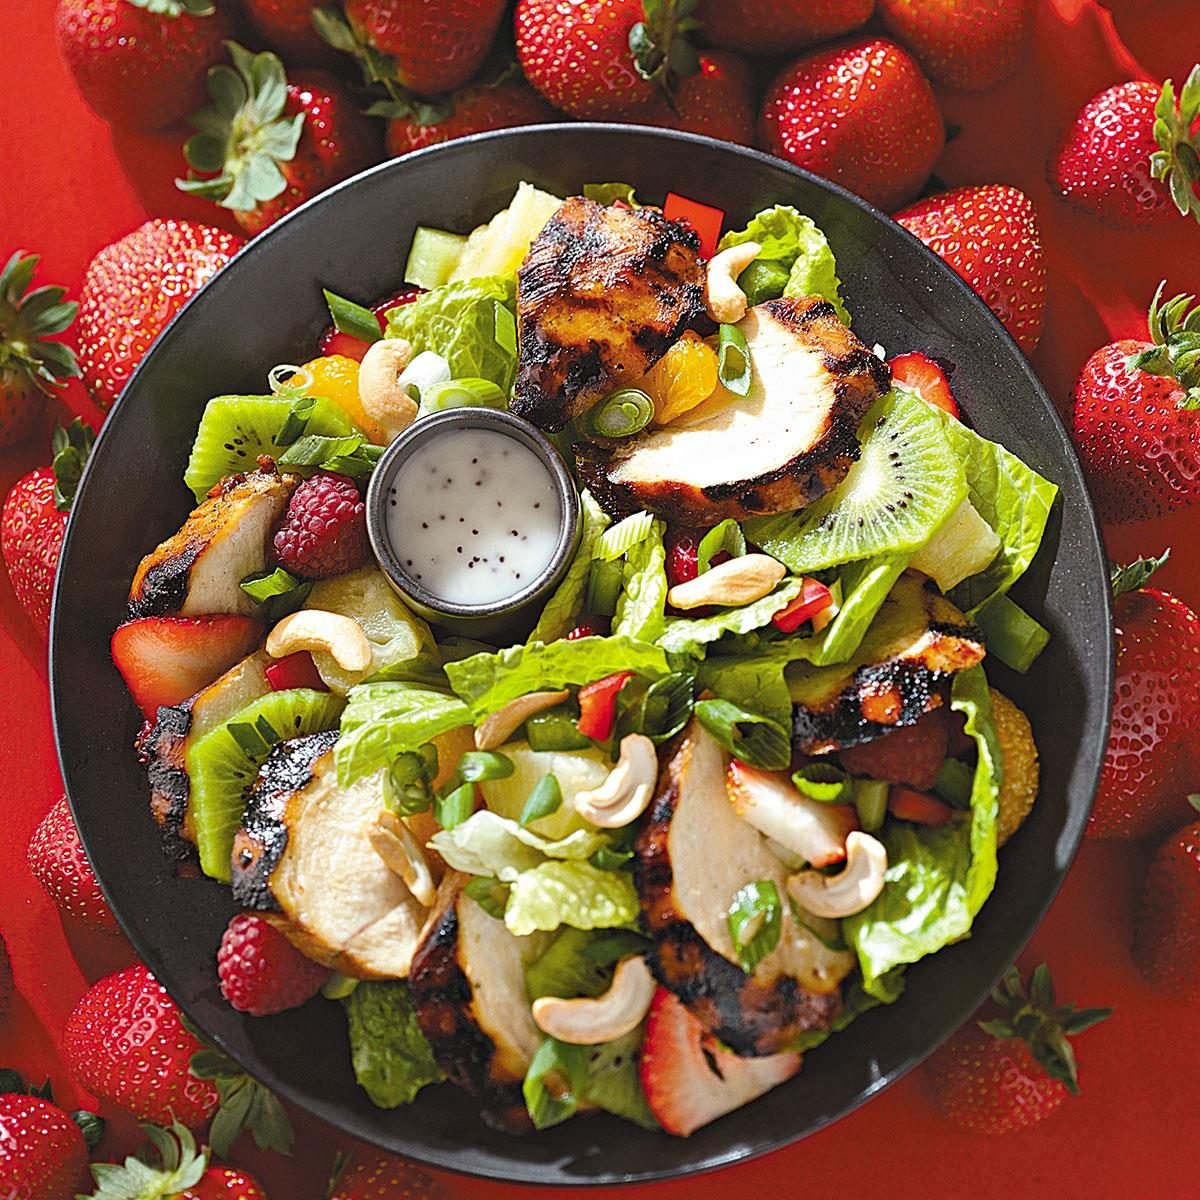 Teriyaki Chicken Salad With Poppy Seed Dressing Exps47580 Thhc1757657d35a Rms